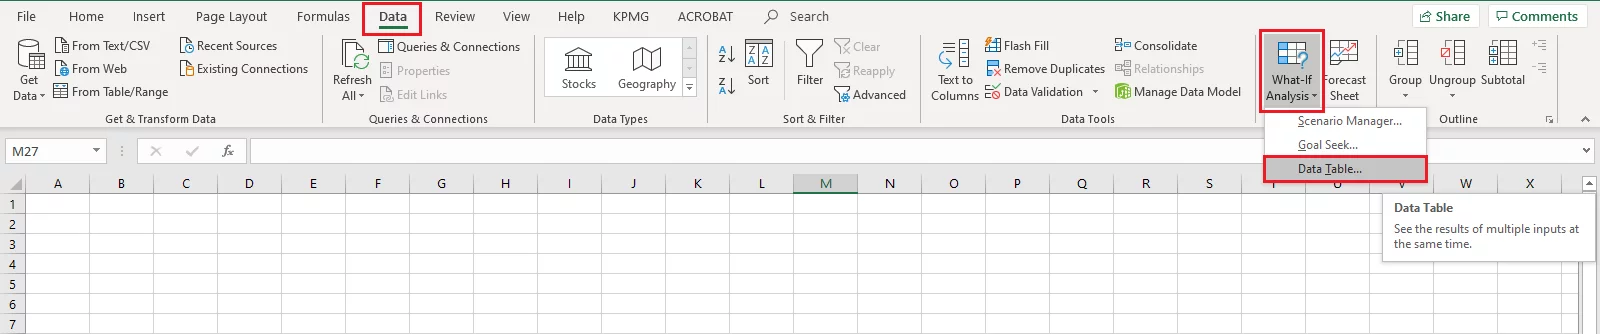 Accessing Data Tables in Excel